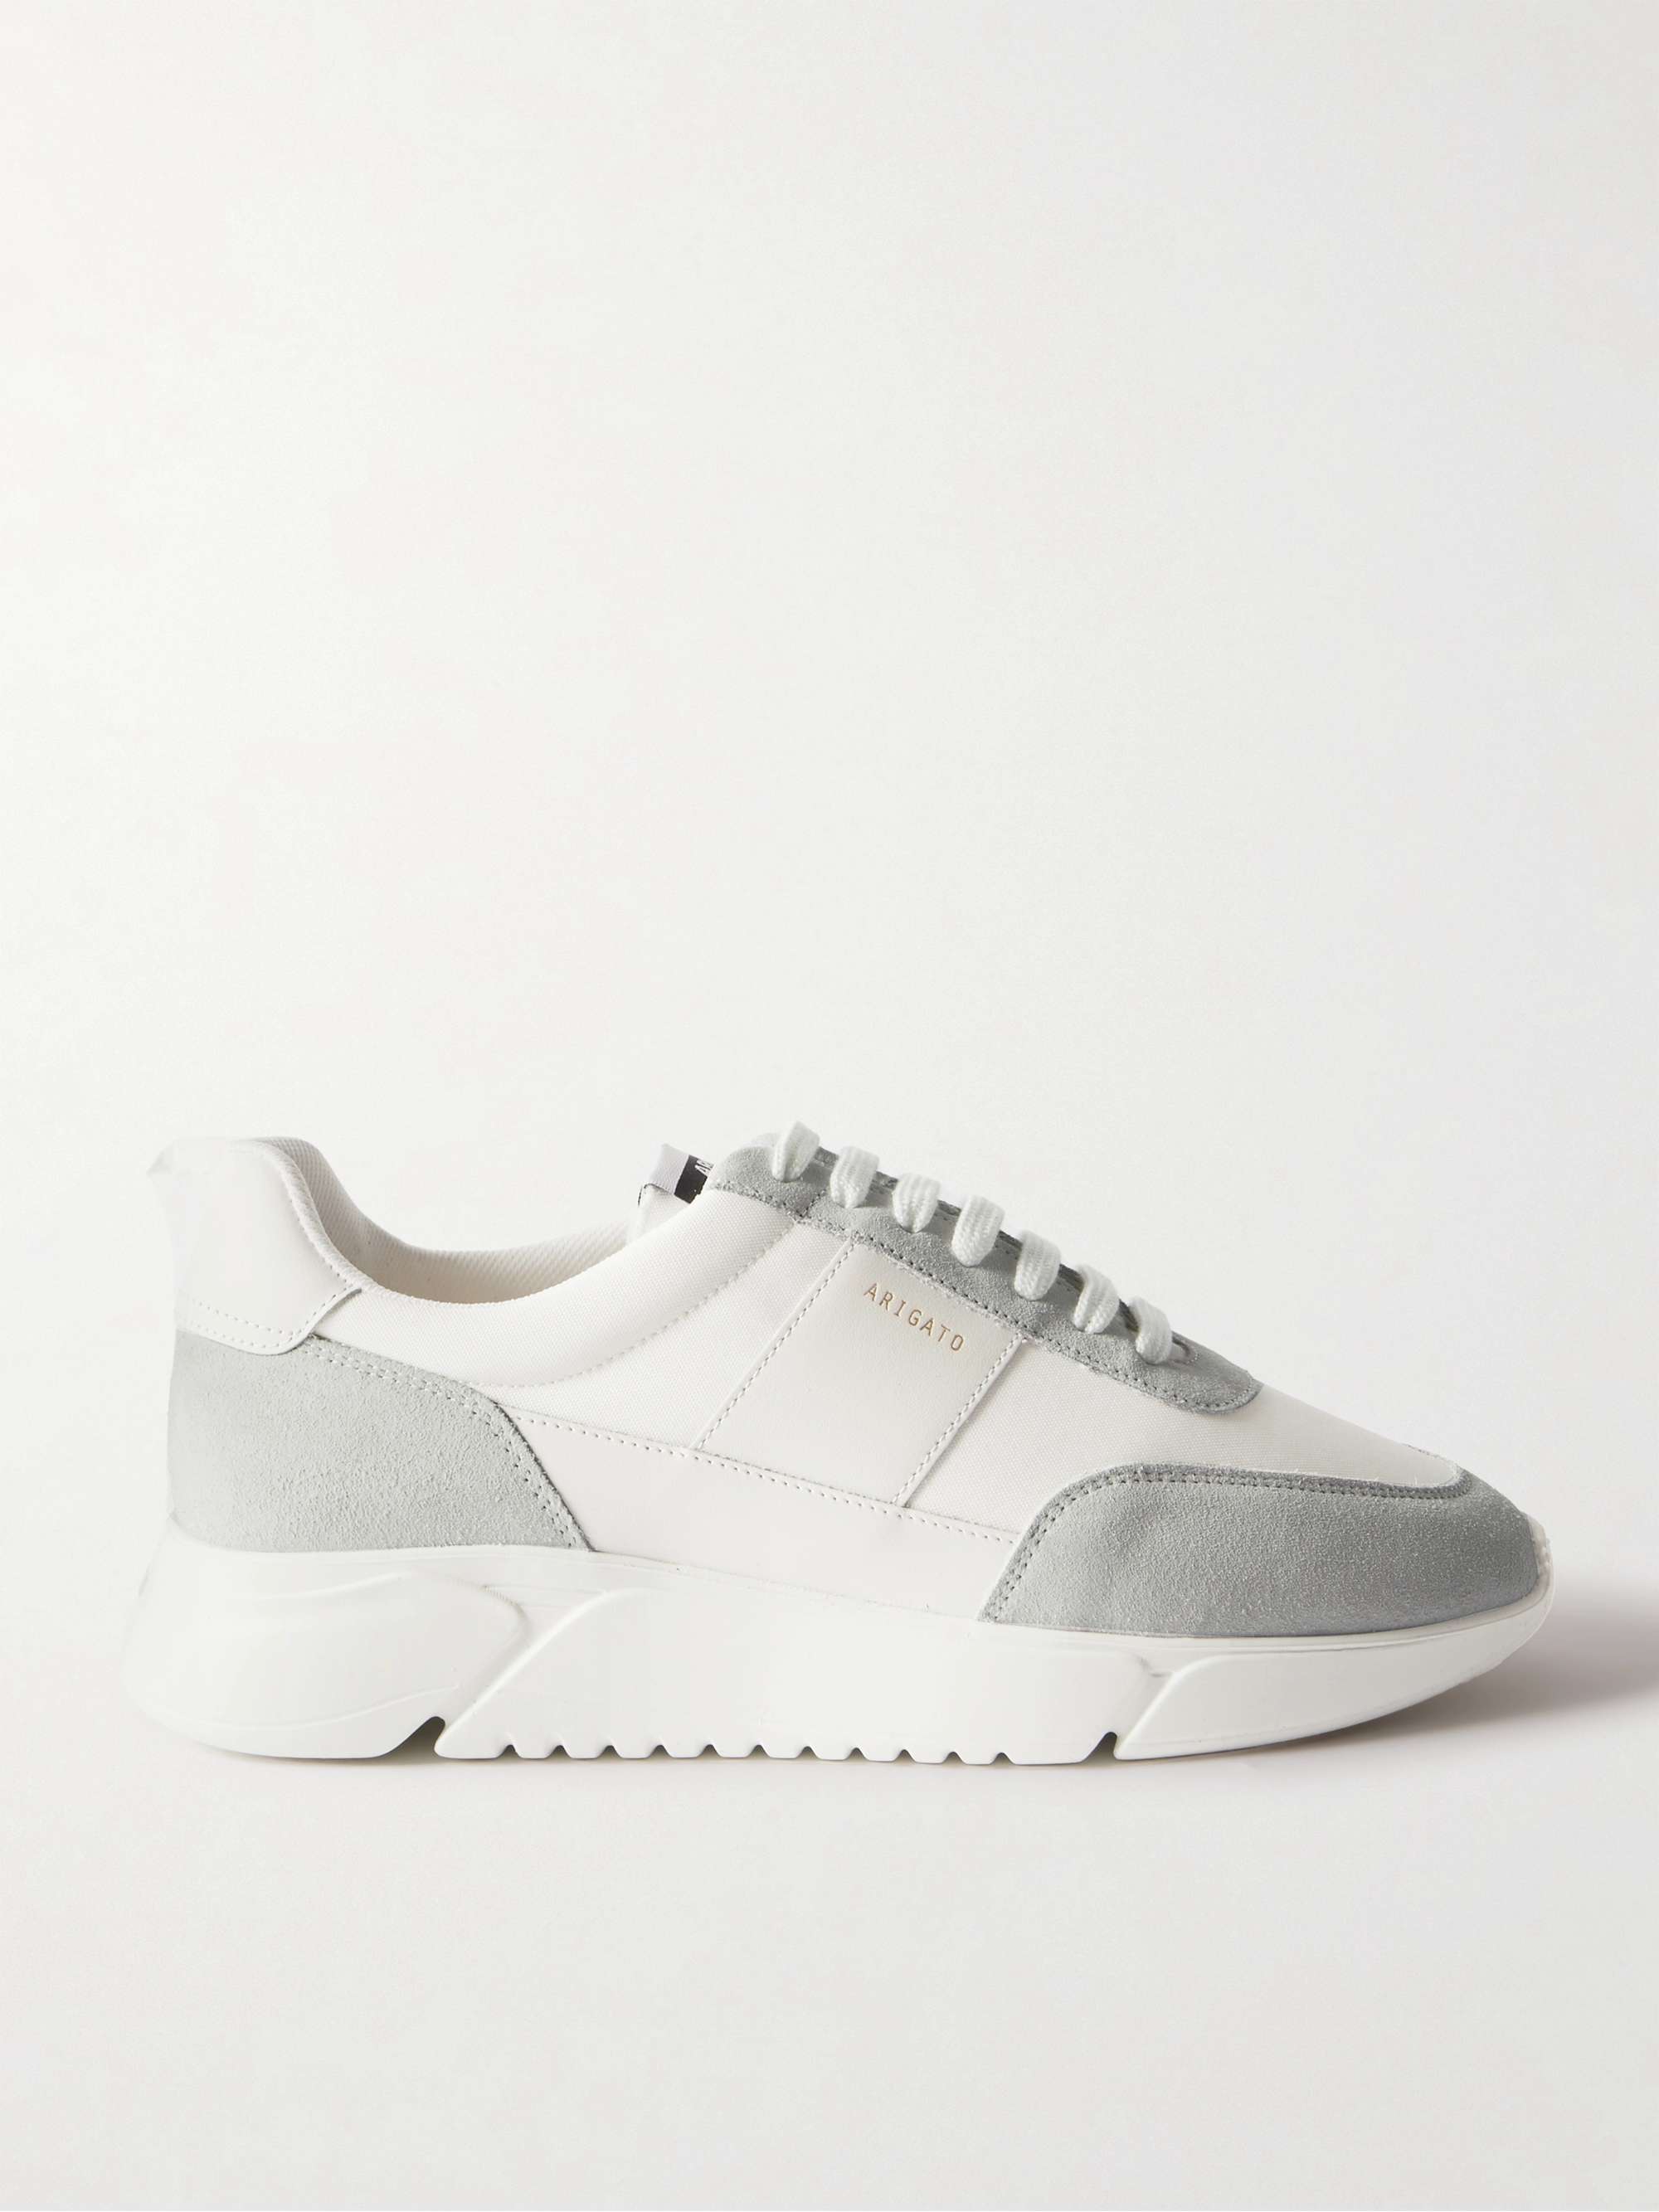 White Genesis Vintage Runner Leather, Mesh and Suede Sneakers | AXEL ARIGATO  | MR PORTER